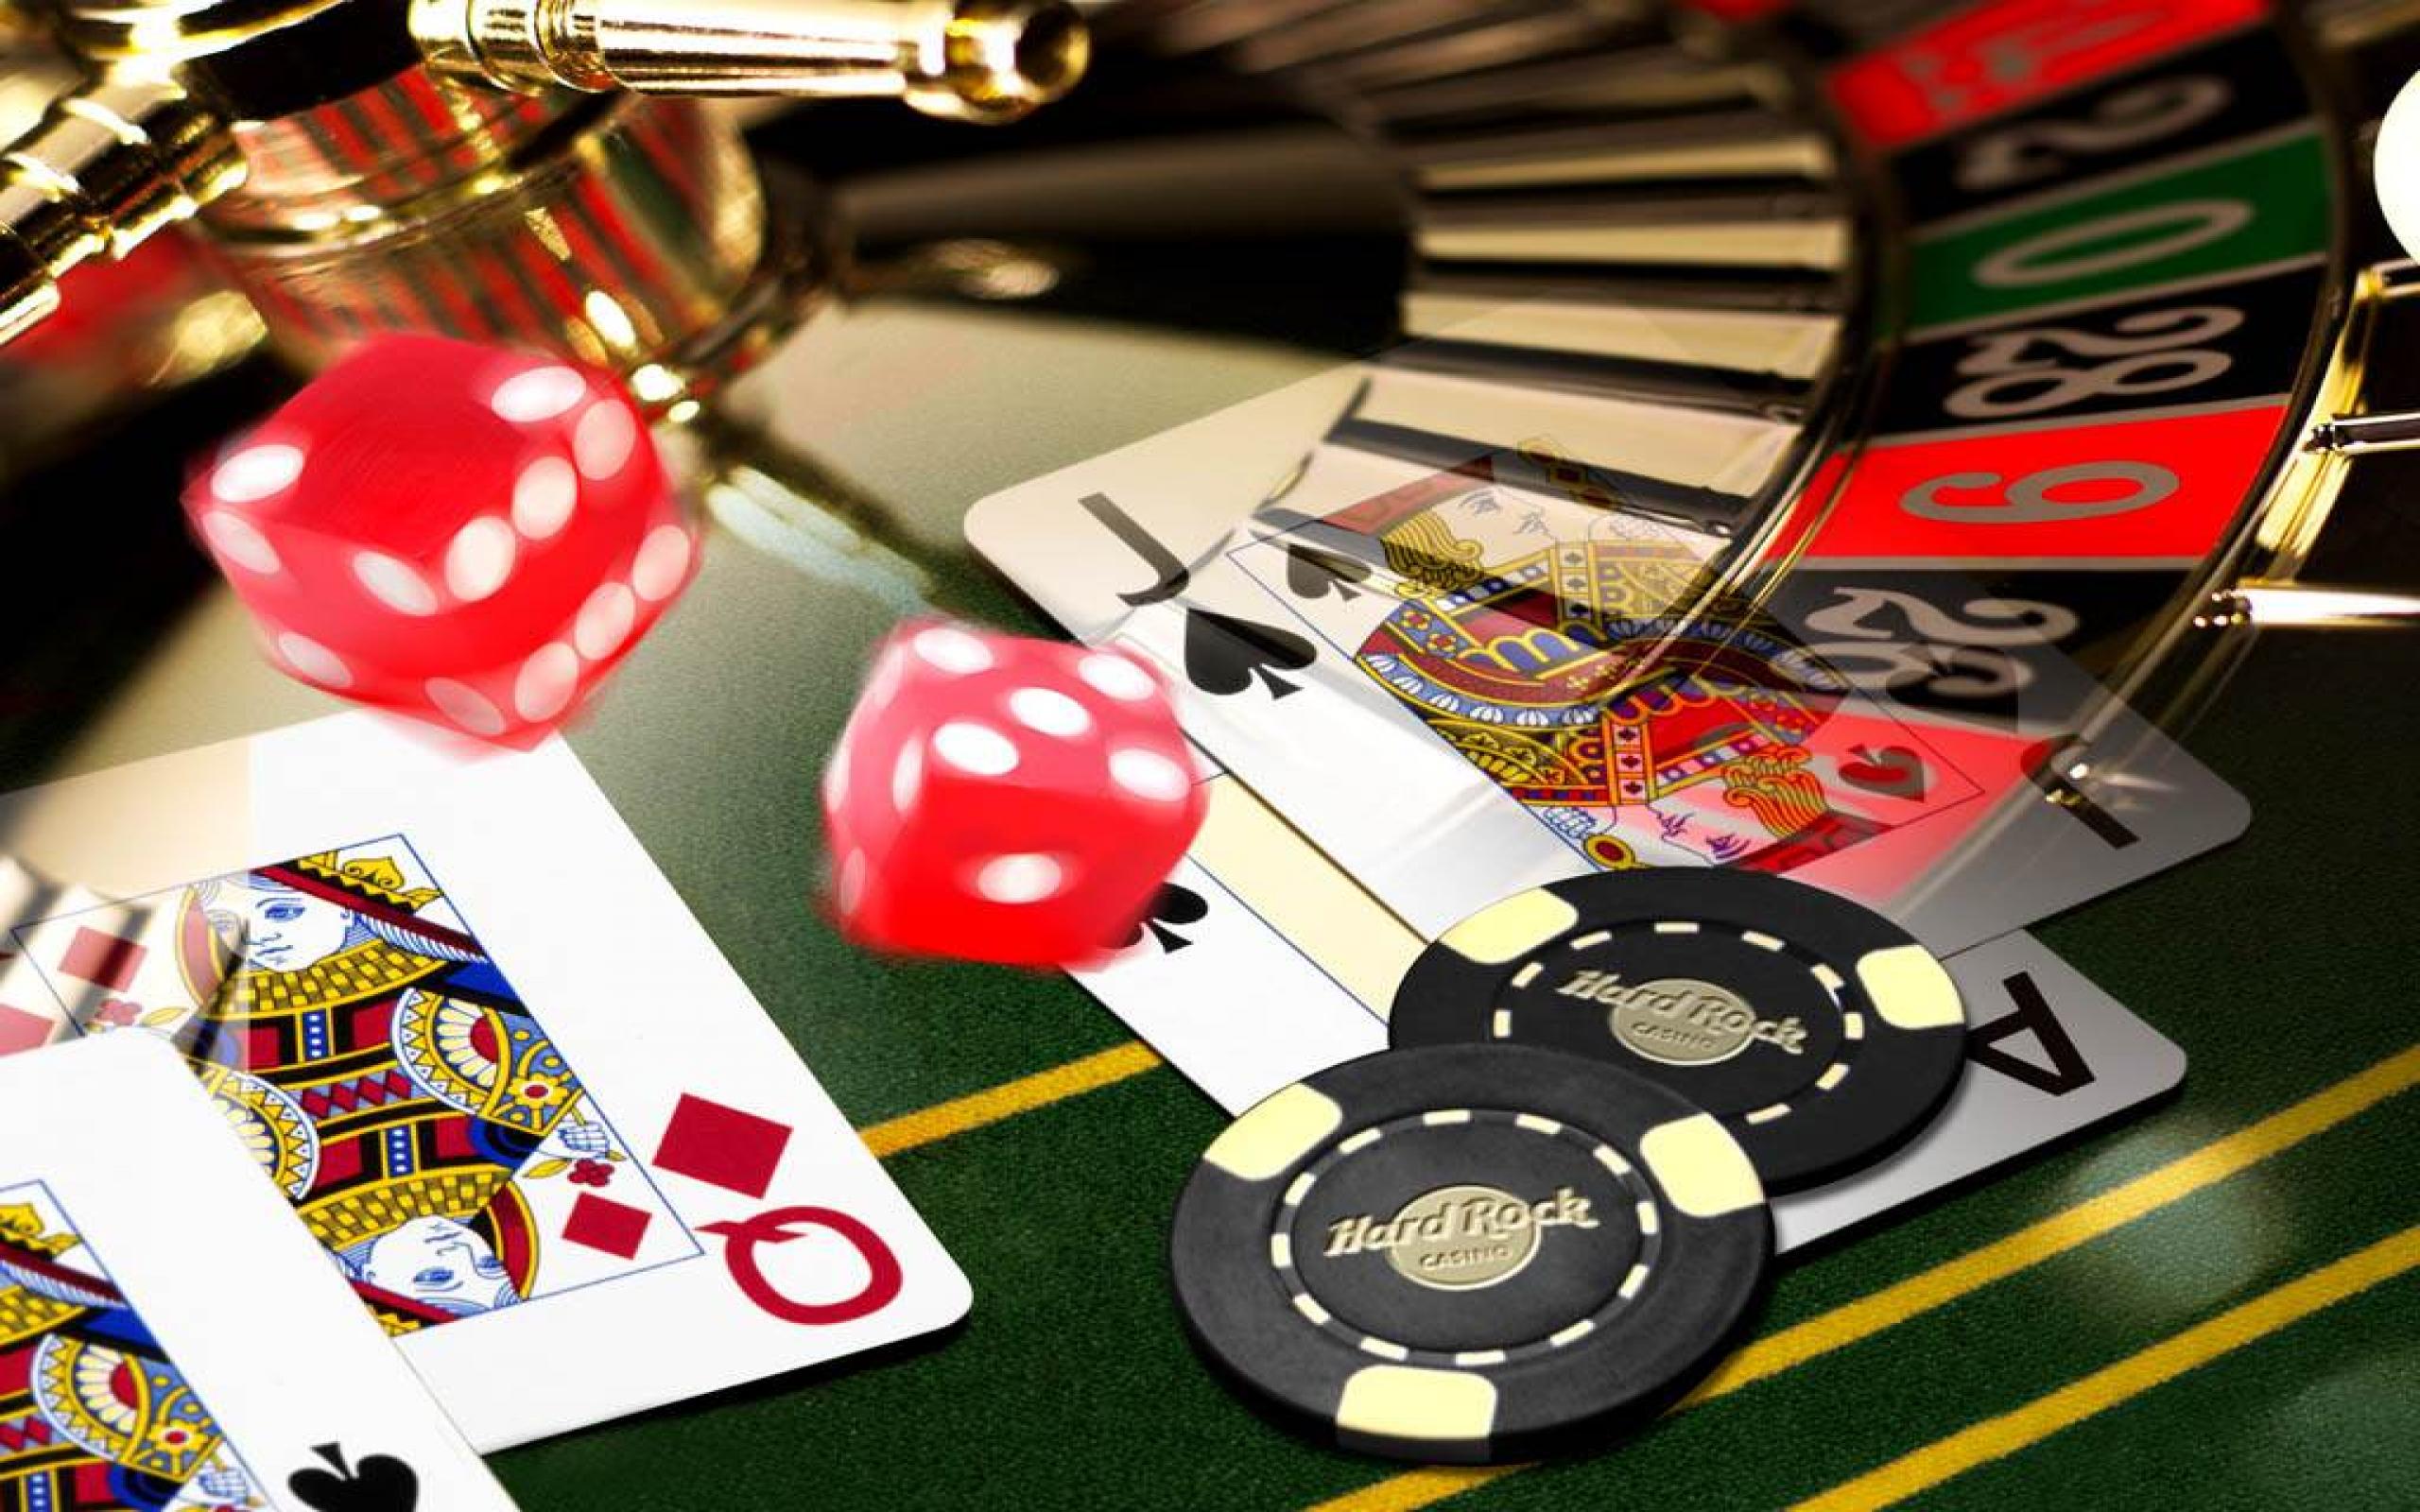 jilibet : The Casino that Redefines Entertainment